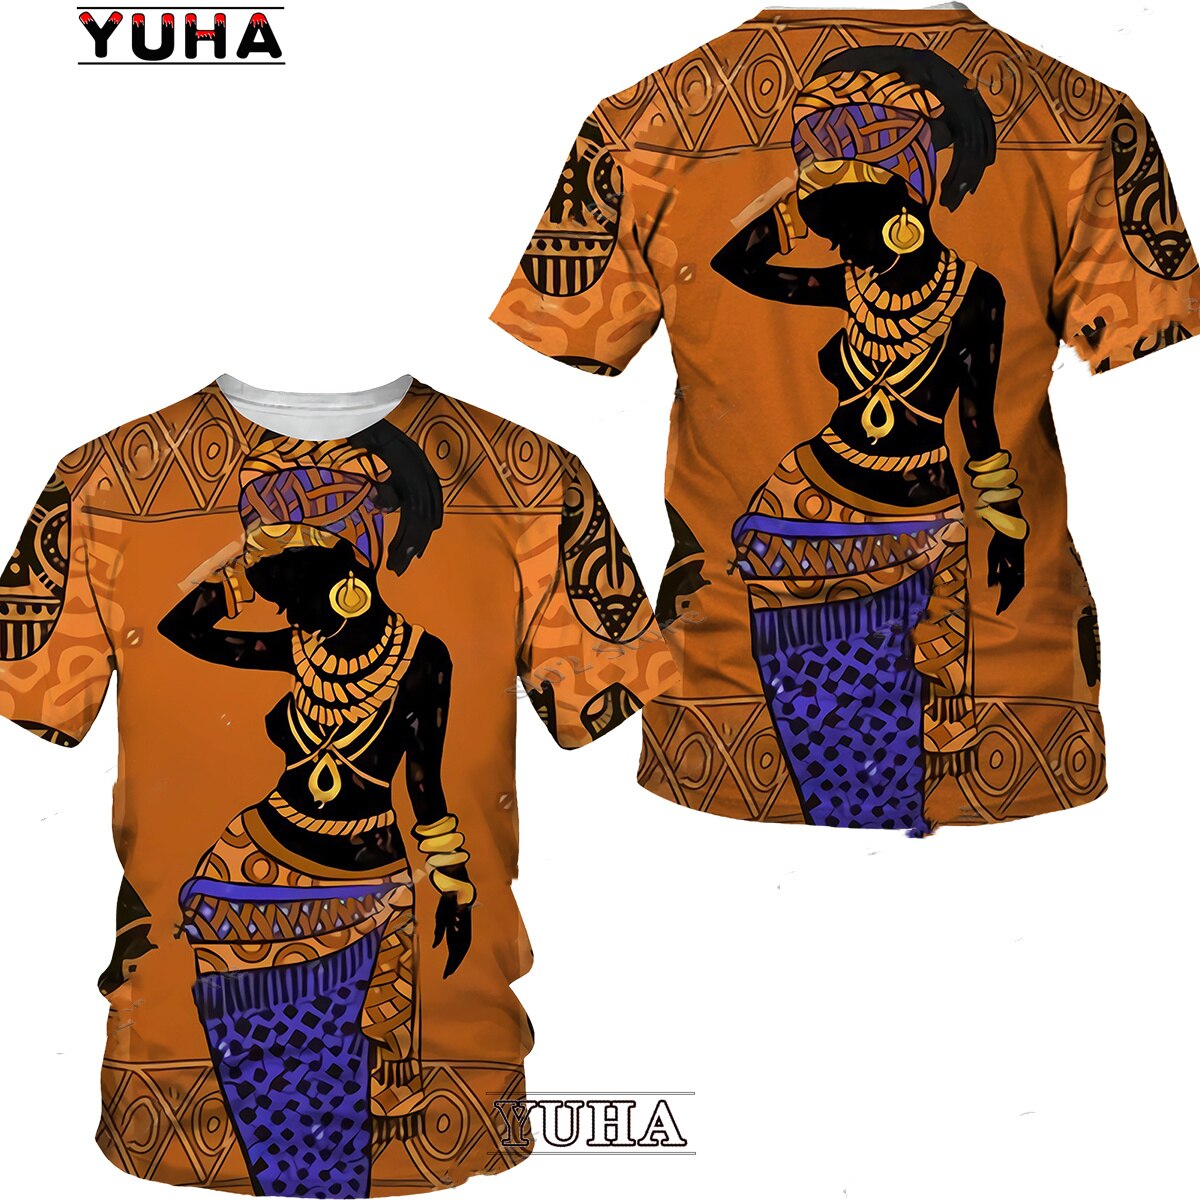 Ethnic Style 3D Print Graphic Tees Unisex Dashiki Clothes Summer African Men's Short Sleeve T Shirt Street Fashion Outfits Men